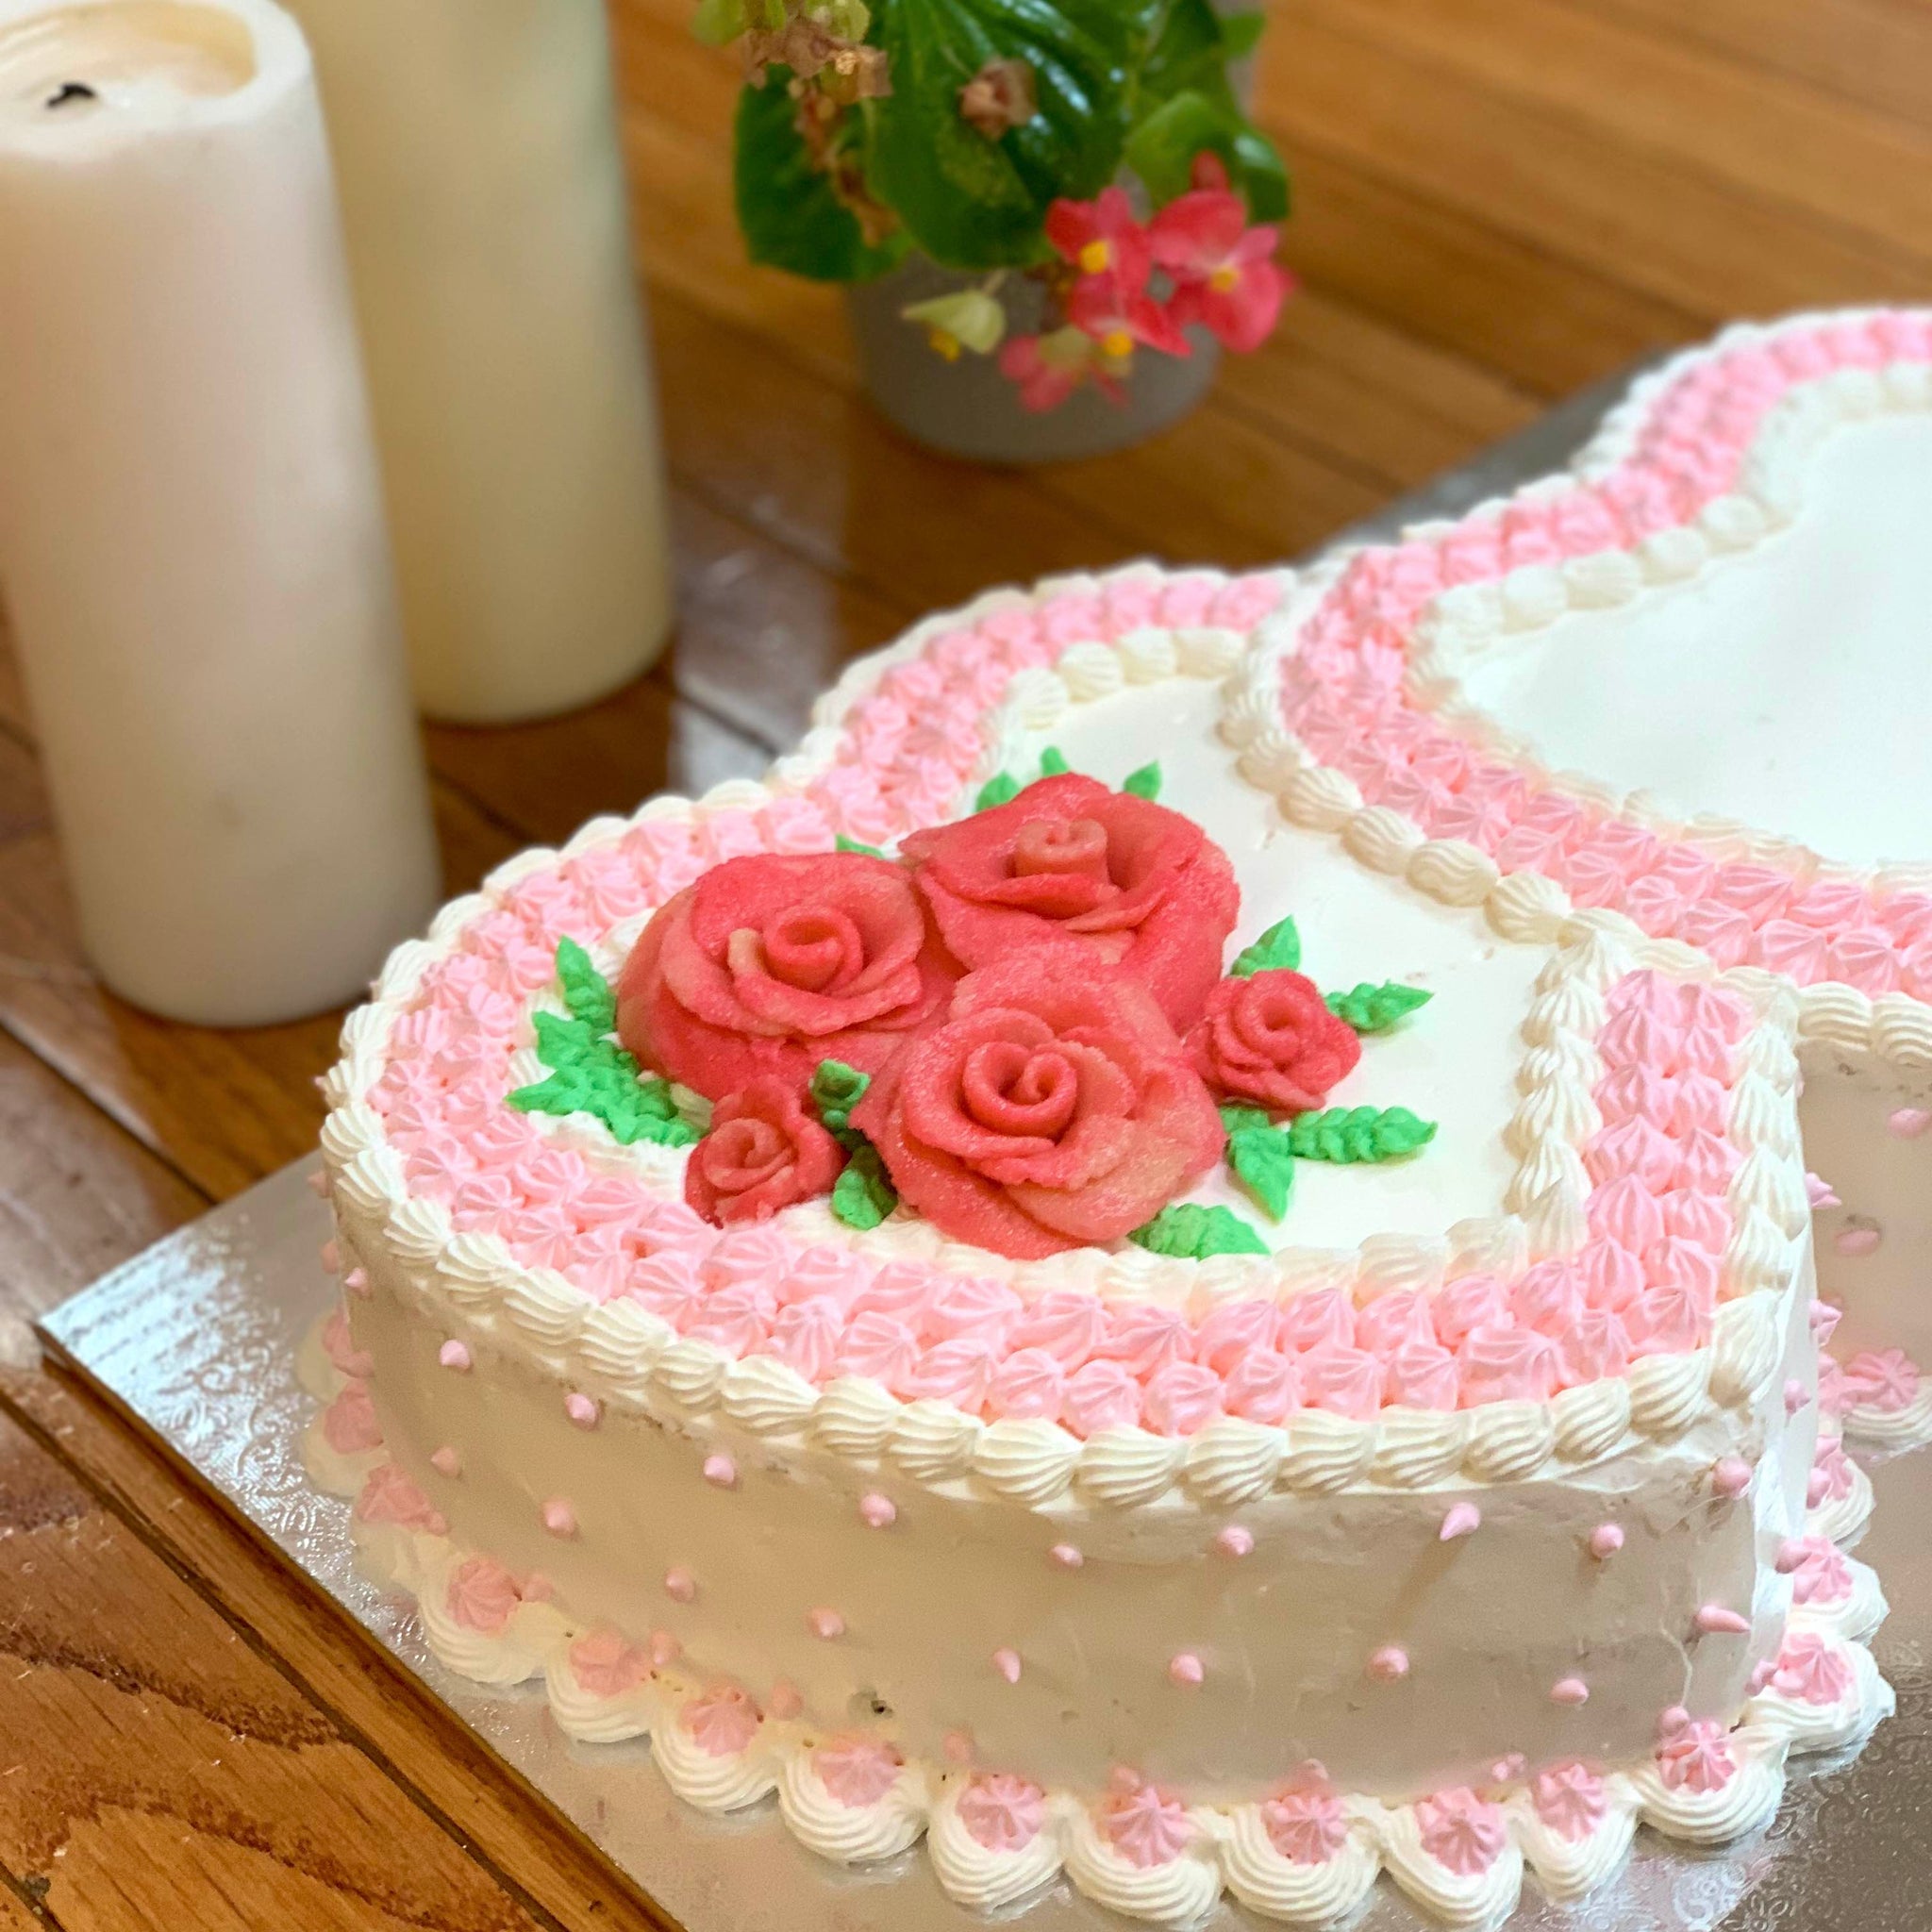 FlourMagic by Aakansha - Double Heart Anniversary cake in whipped cream  with Hand made edible roses 🌹❤ Black Forest Flavor !! | Facebook